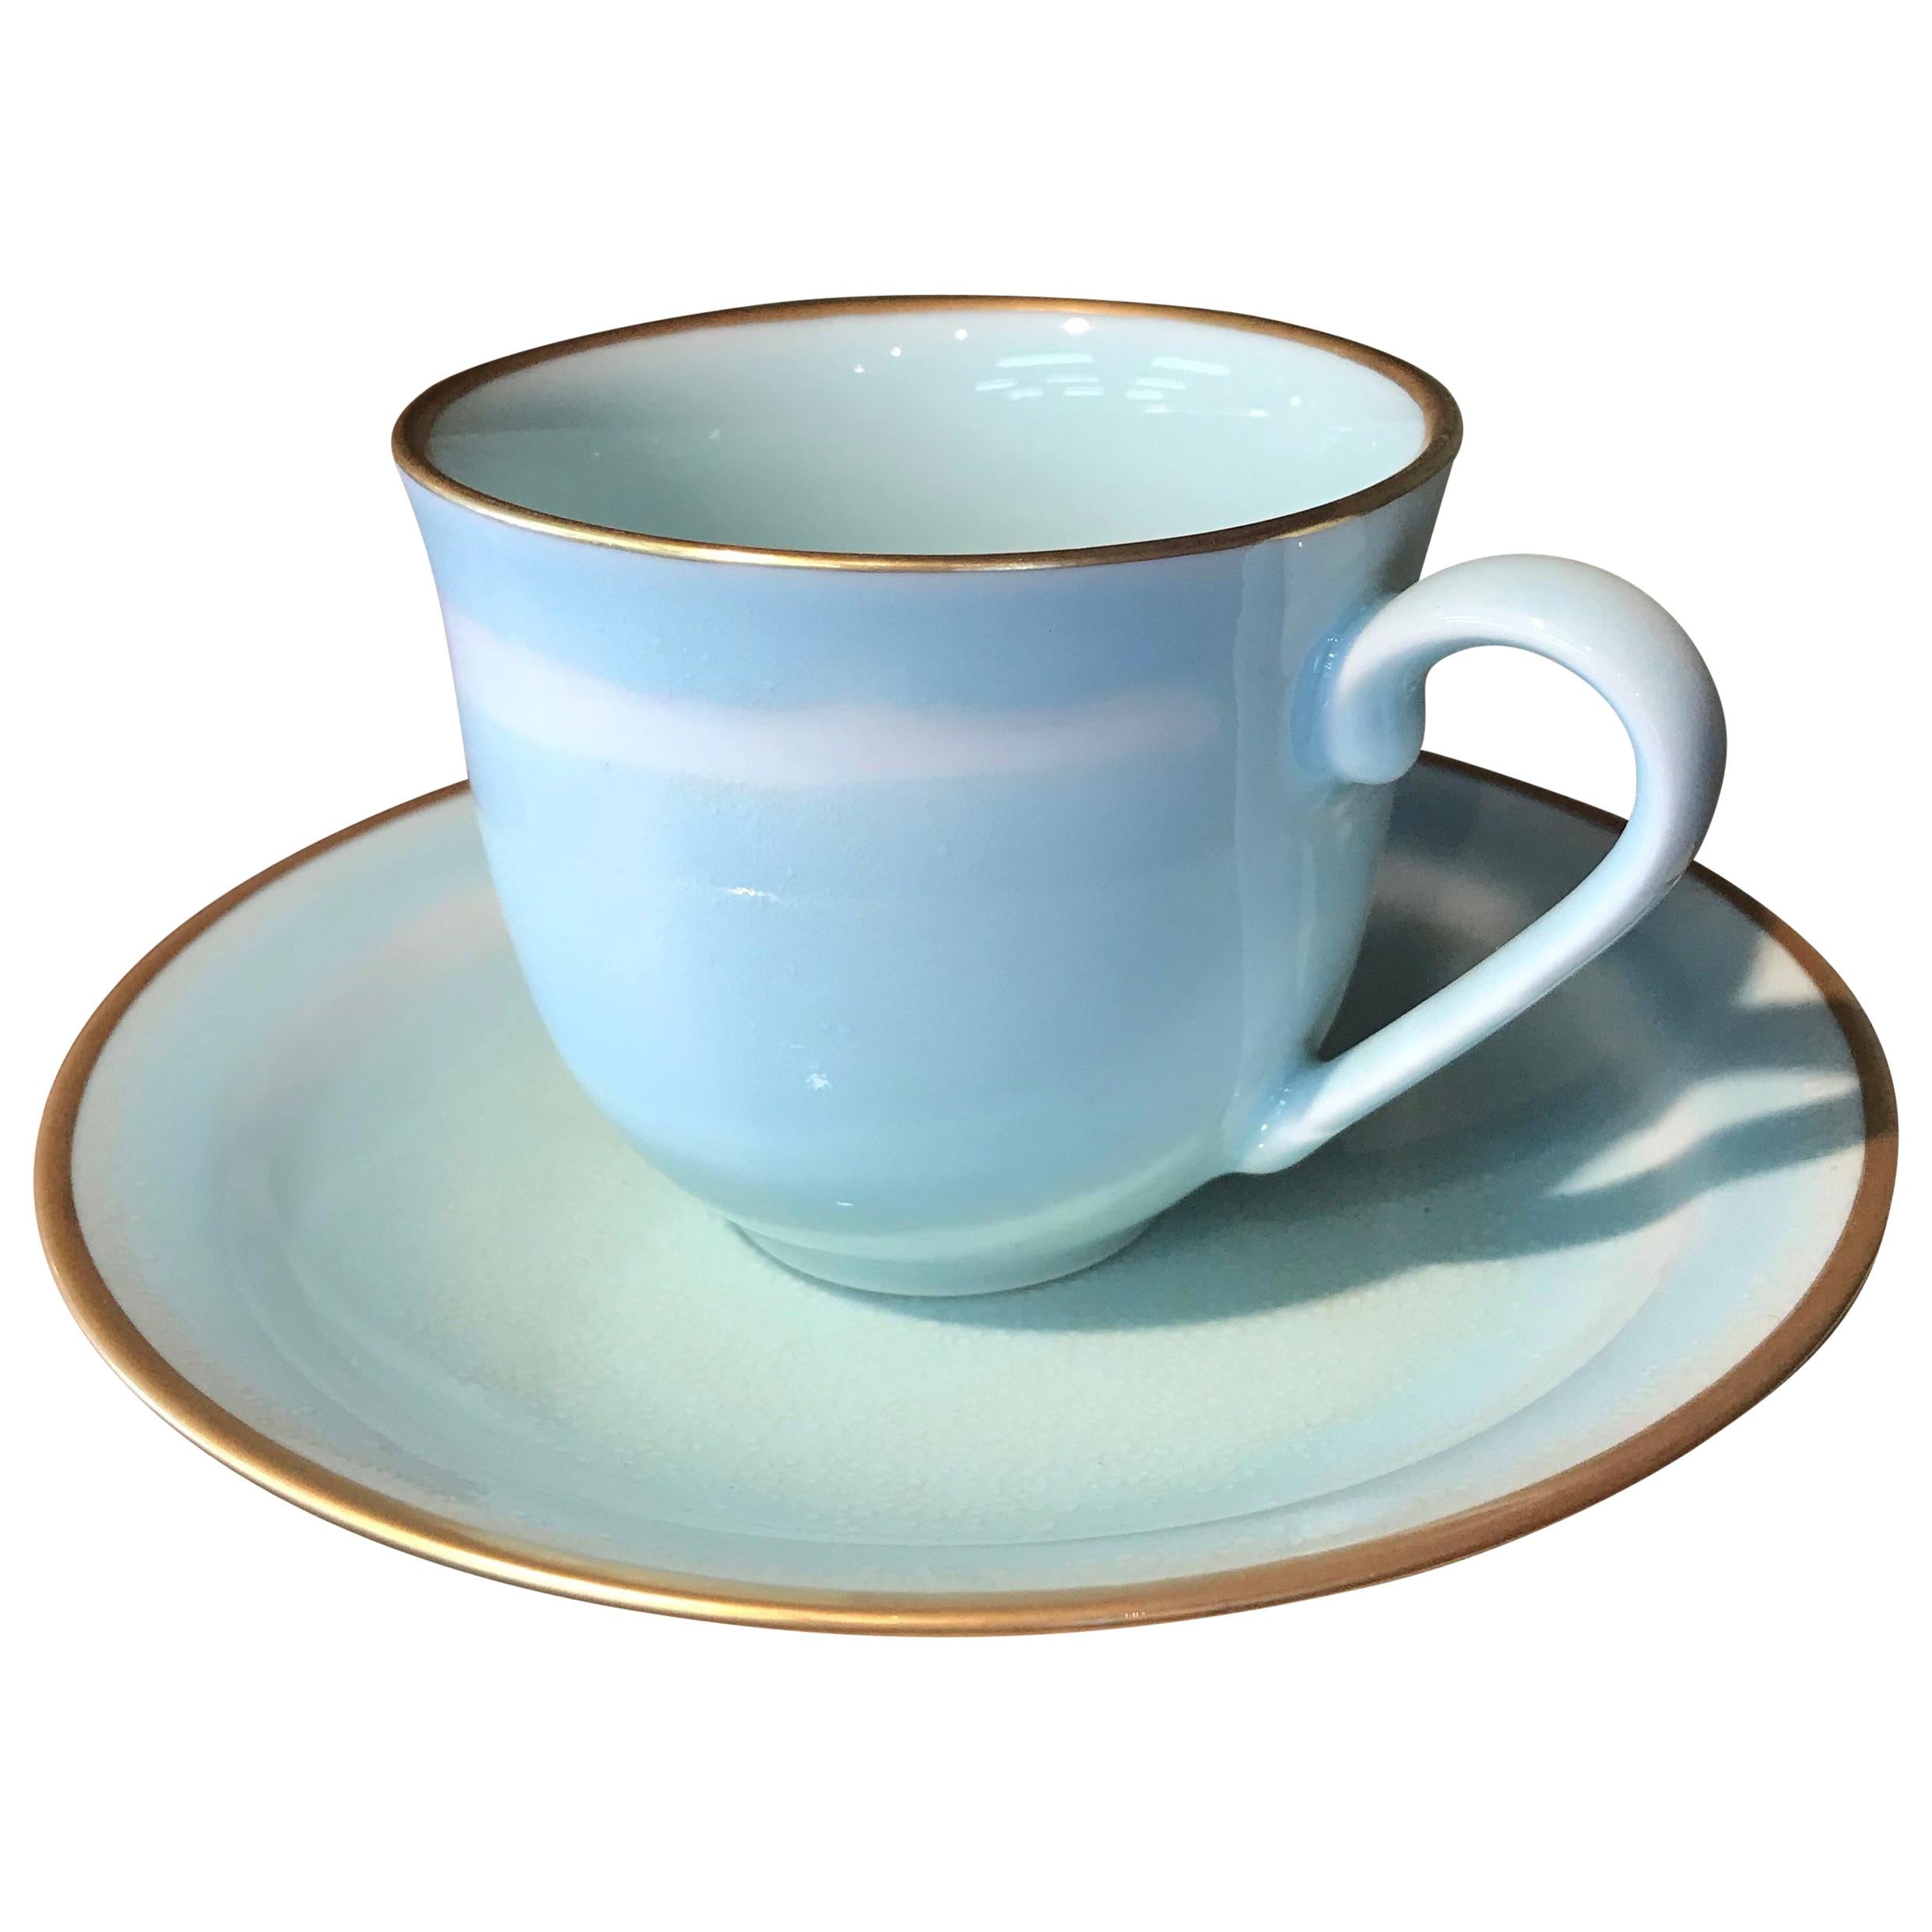 Japanese Hand-Glazed Blue Porcelain Cup and Saucer by Contemporary Master Artist